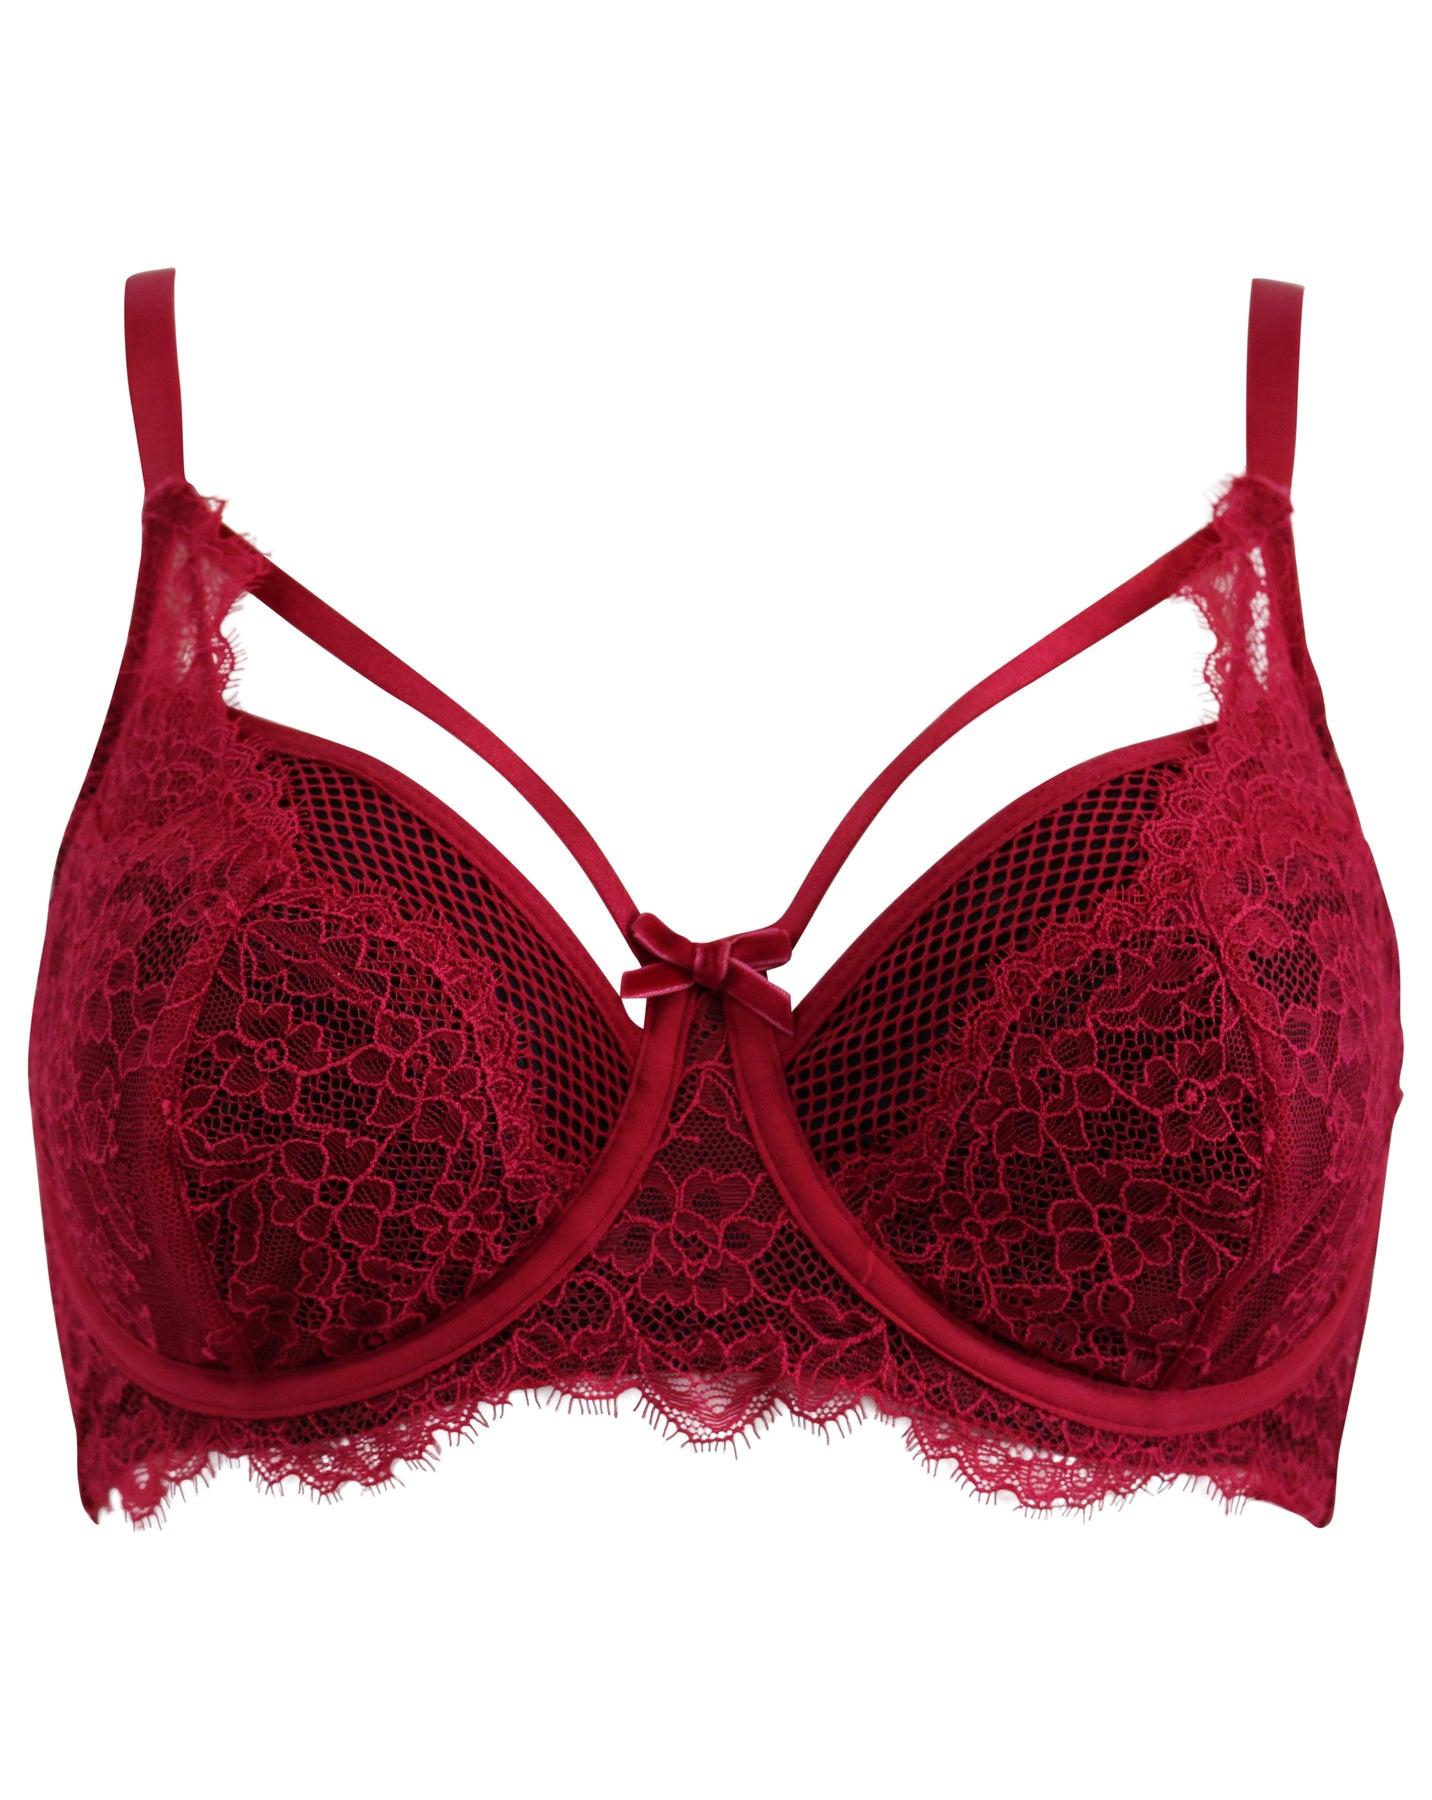 Pour Moi India Embroidery Underwire Bustier (20339)- Red